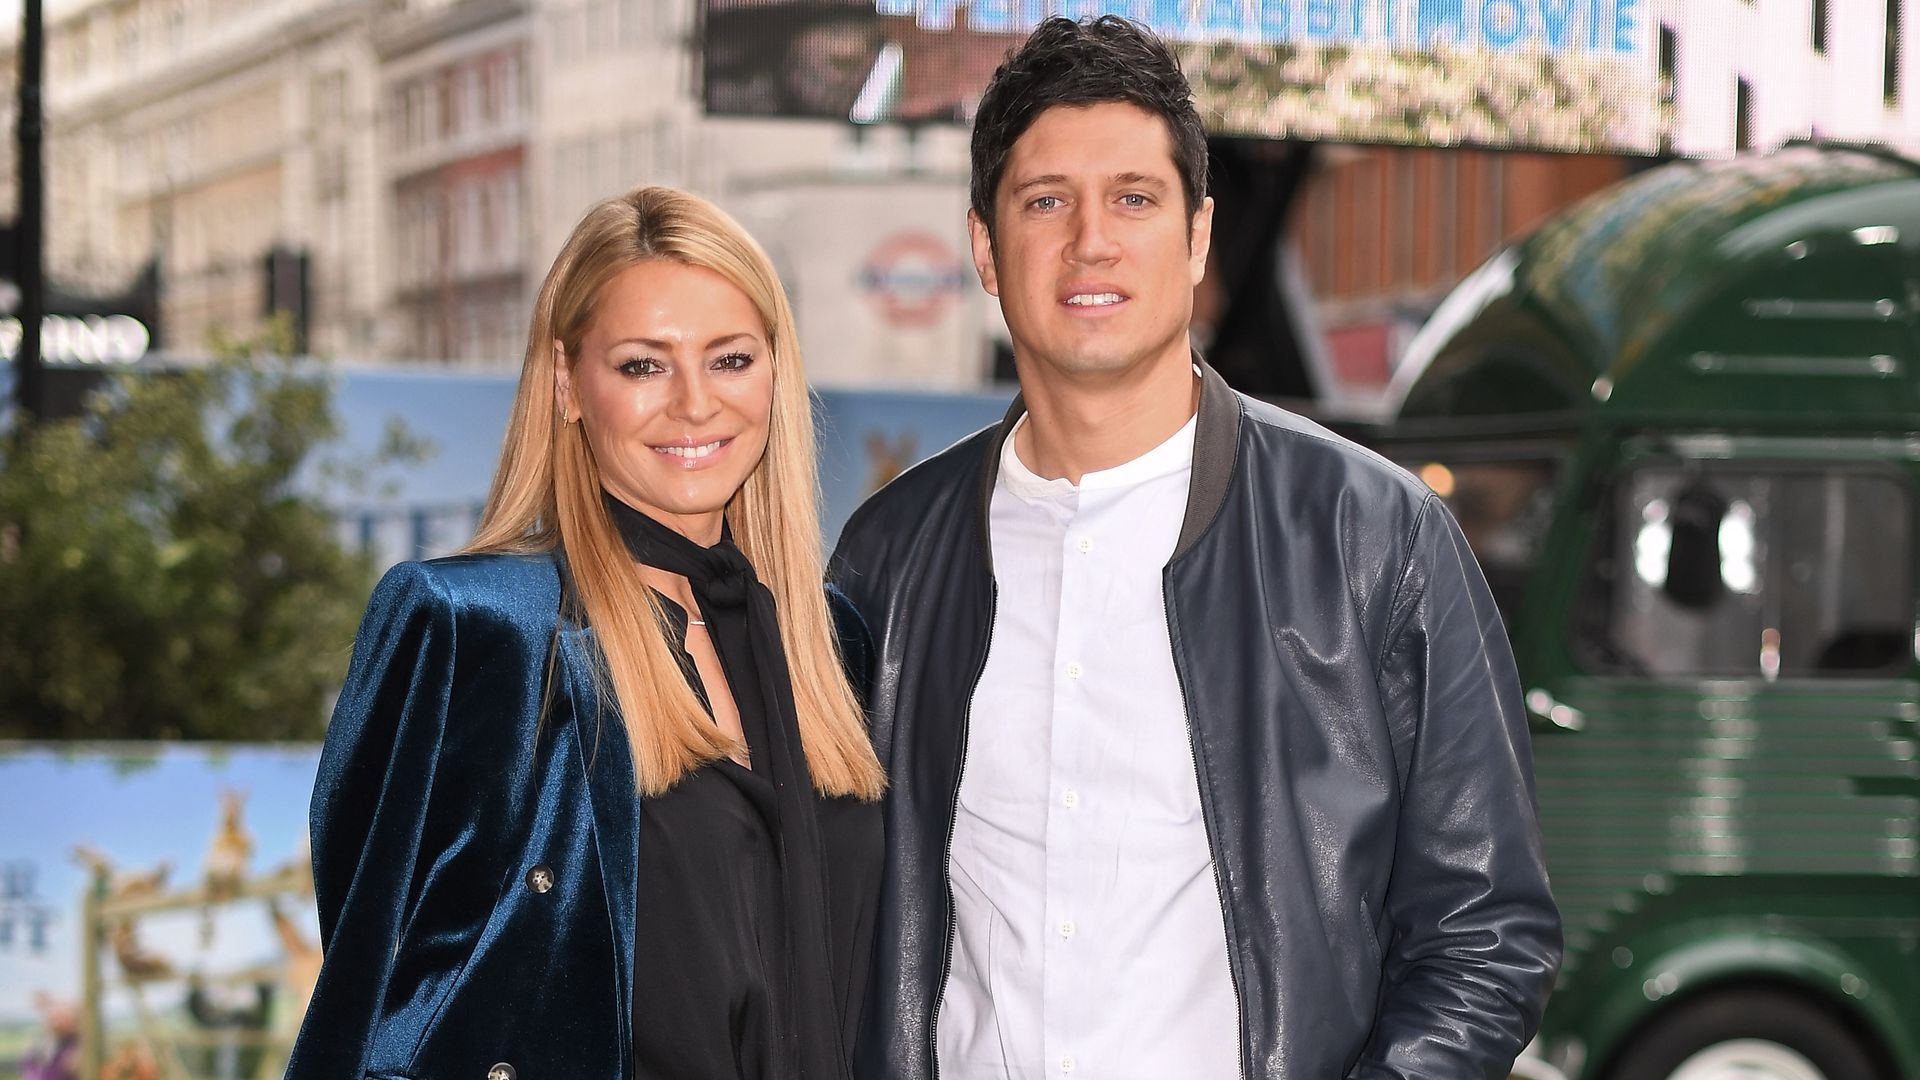 Tess Daly and Vernon Kay in leather standing in grassy field